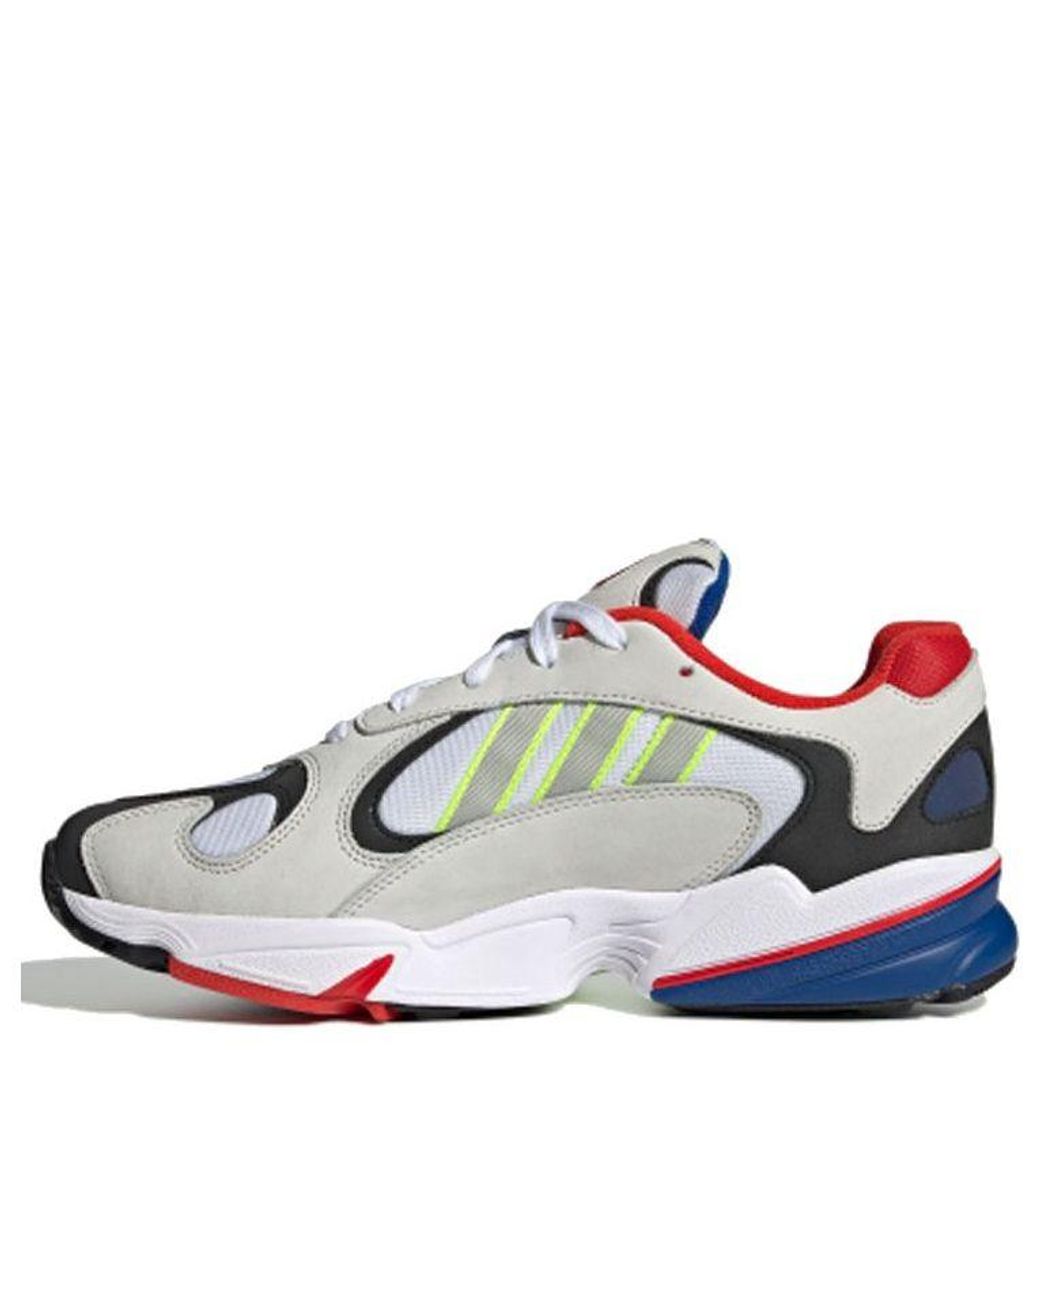 adidas Originals Yung-1 Low Top Casual Shoes Black Red White | Lyst